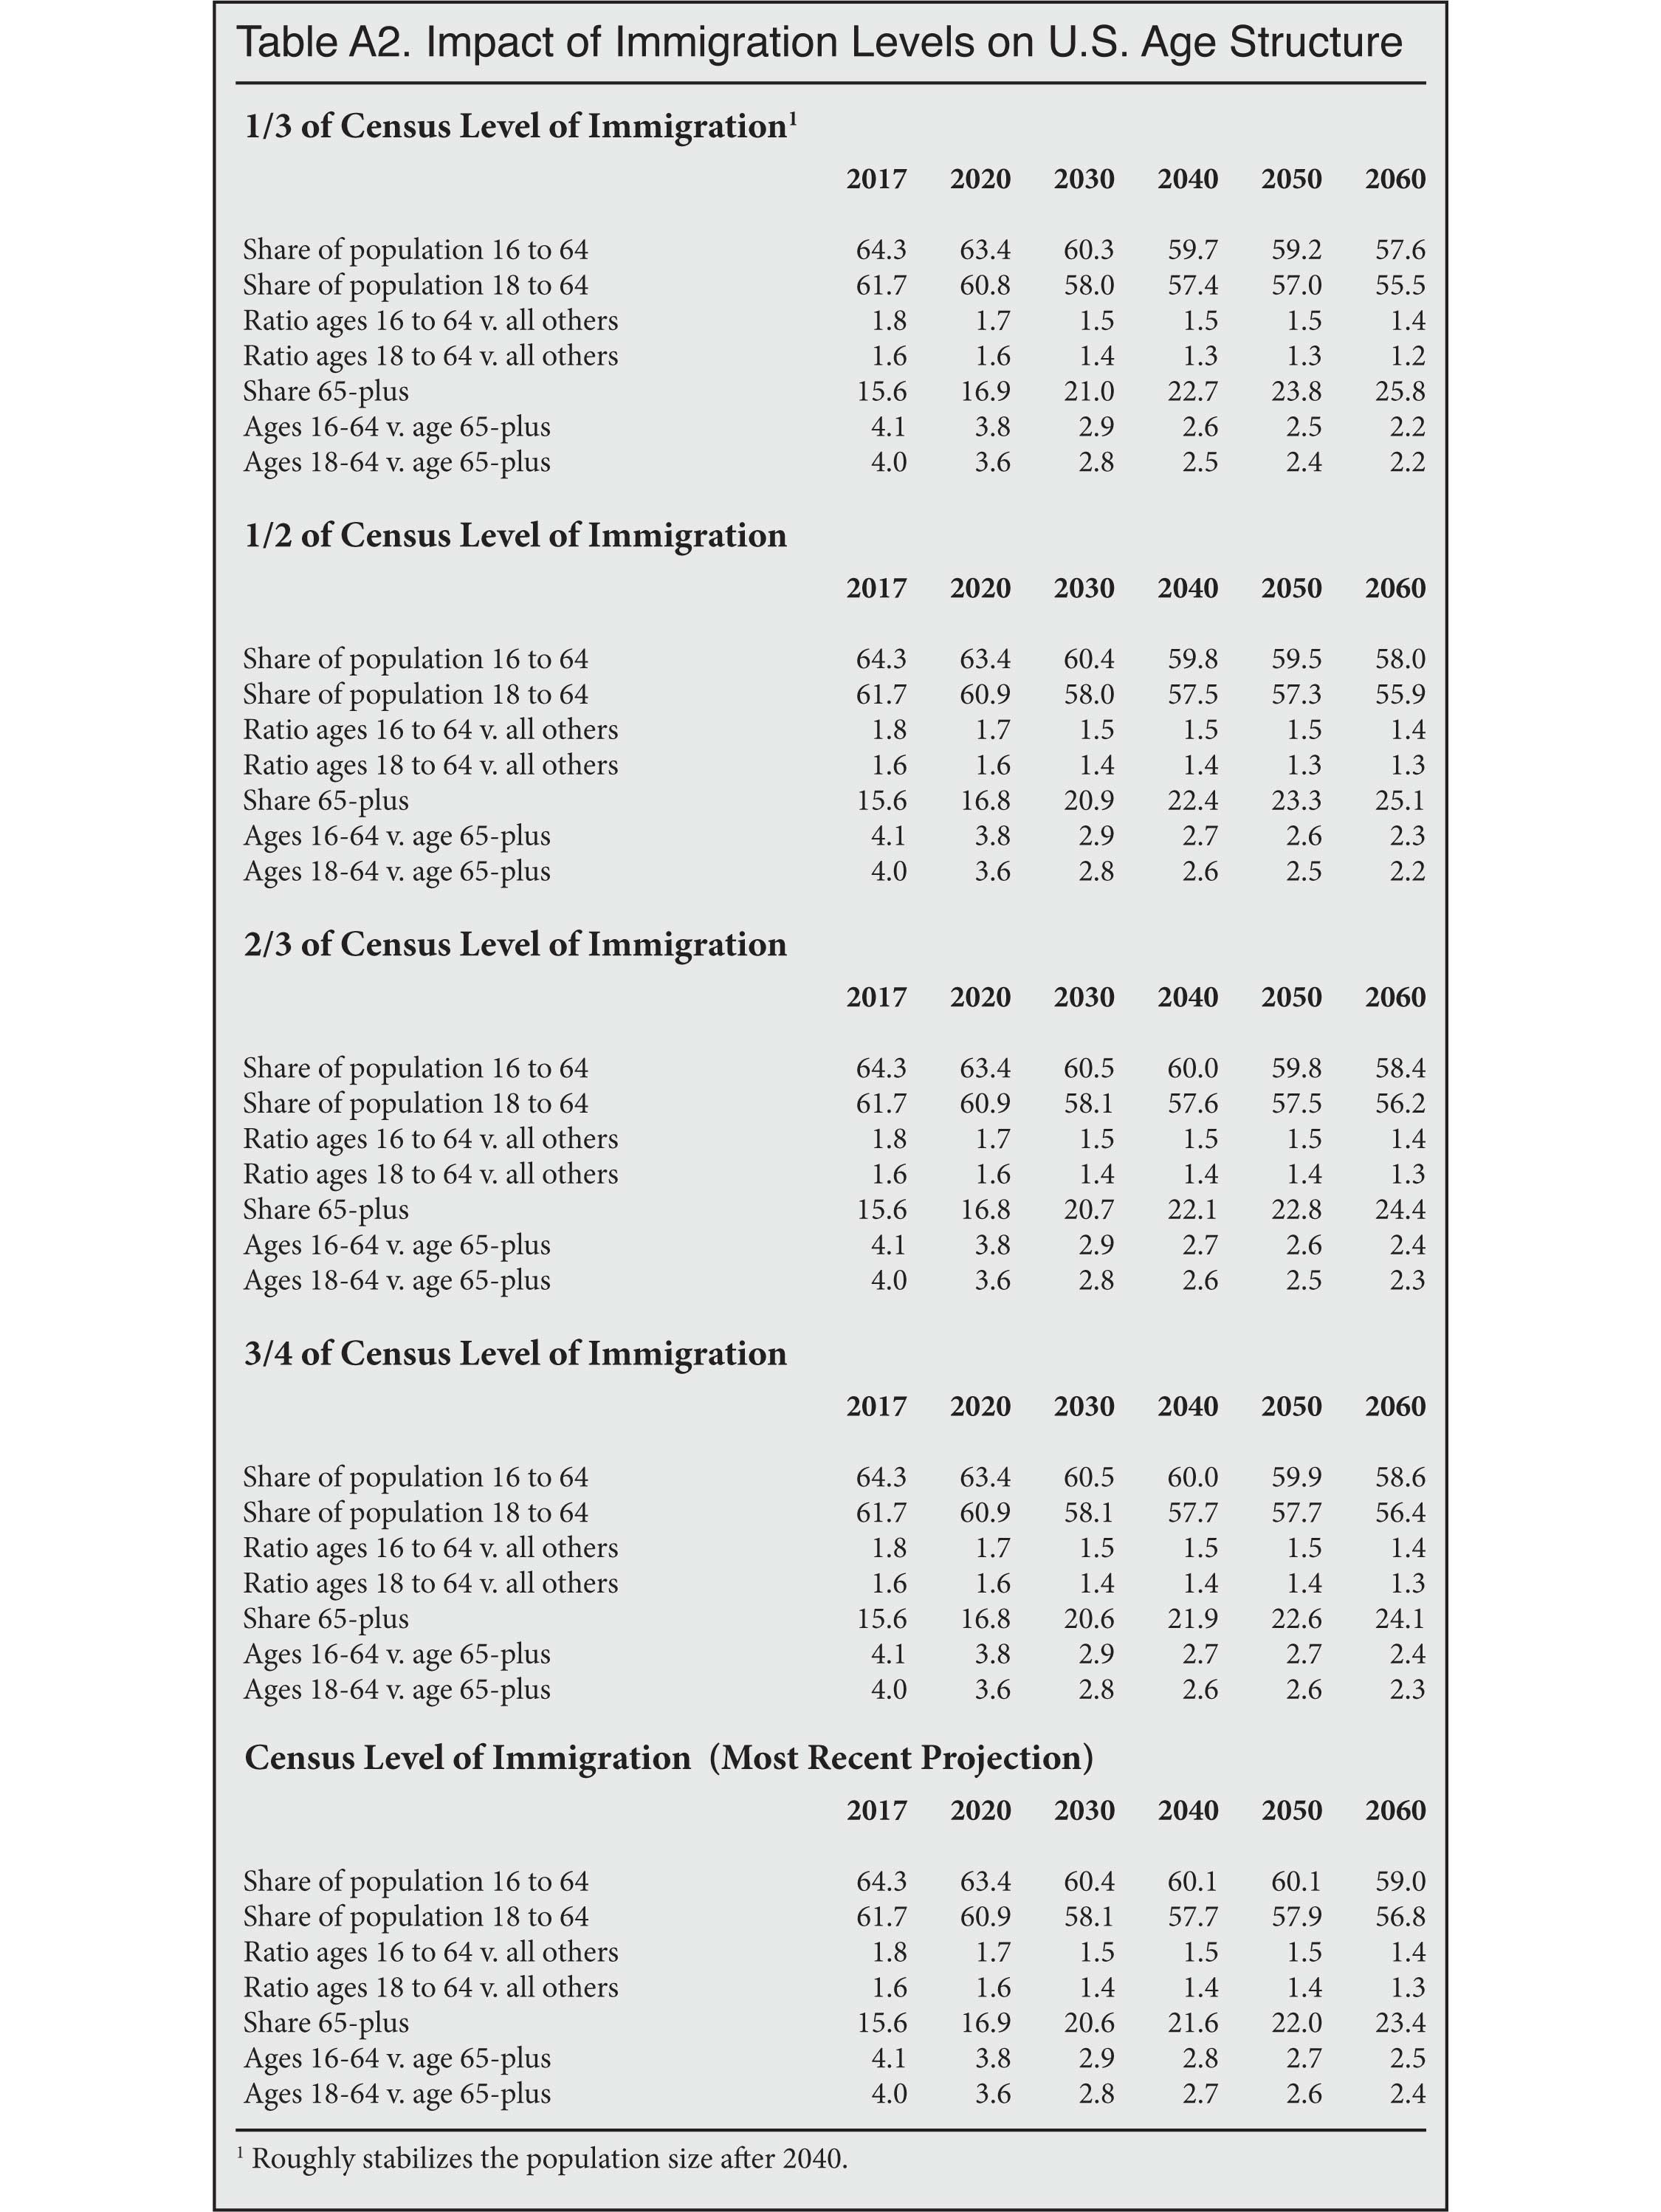 Table: Impact of Immigration Levels on US Age Structure